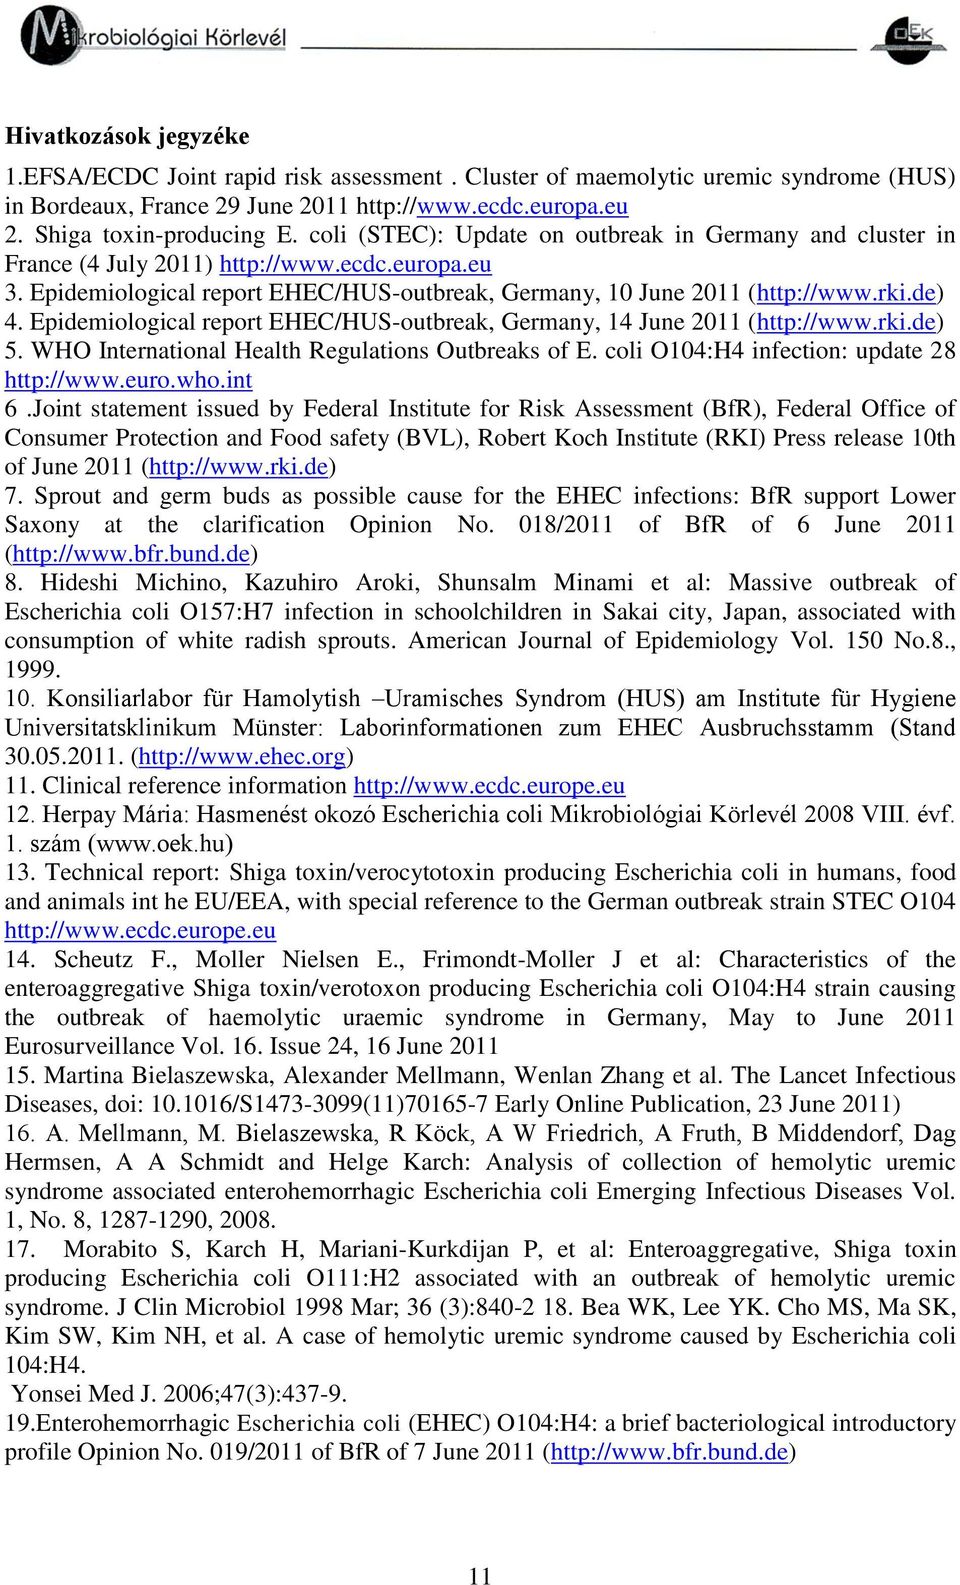 Epidemiological report EHEC/HUS-outbreak, Germany, 14 June 2011 (http://www.rki.de) 5. WHO International Health Regulations Outbreaks of E. coli O104:H4 infection: update 28 http://www.euro.who.int 6.